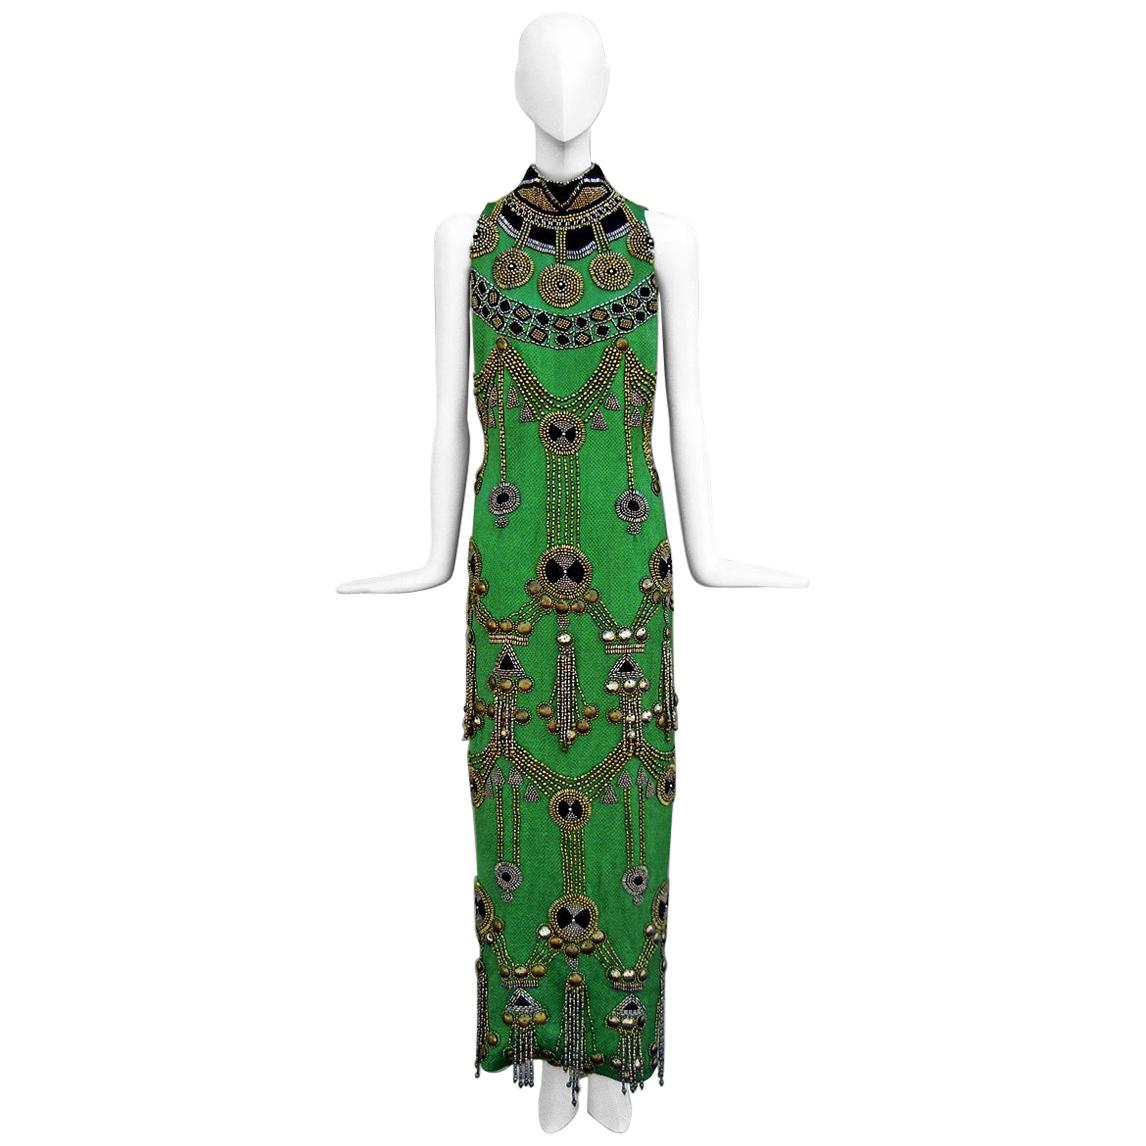  Rare 1990 Versace Atelier Egyptian One-of-a-Kind Heavily Beaded Runway Gown